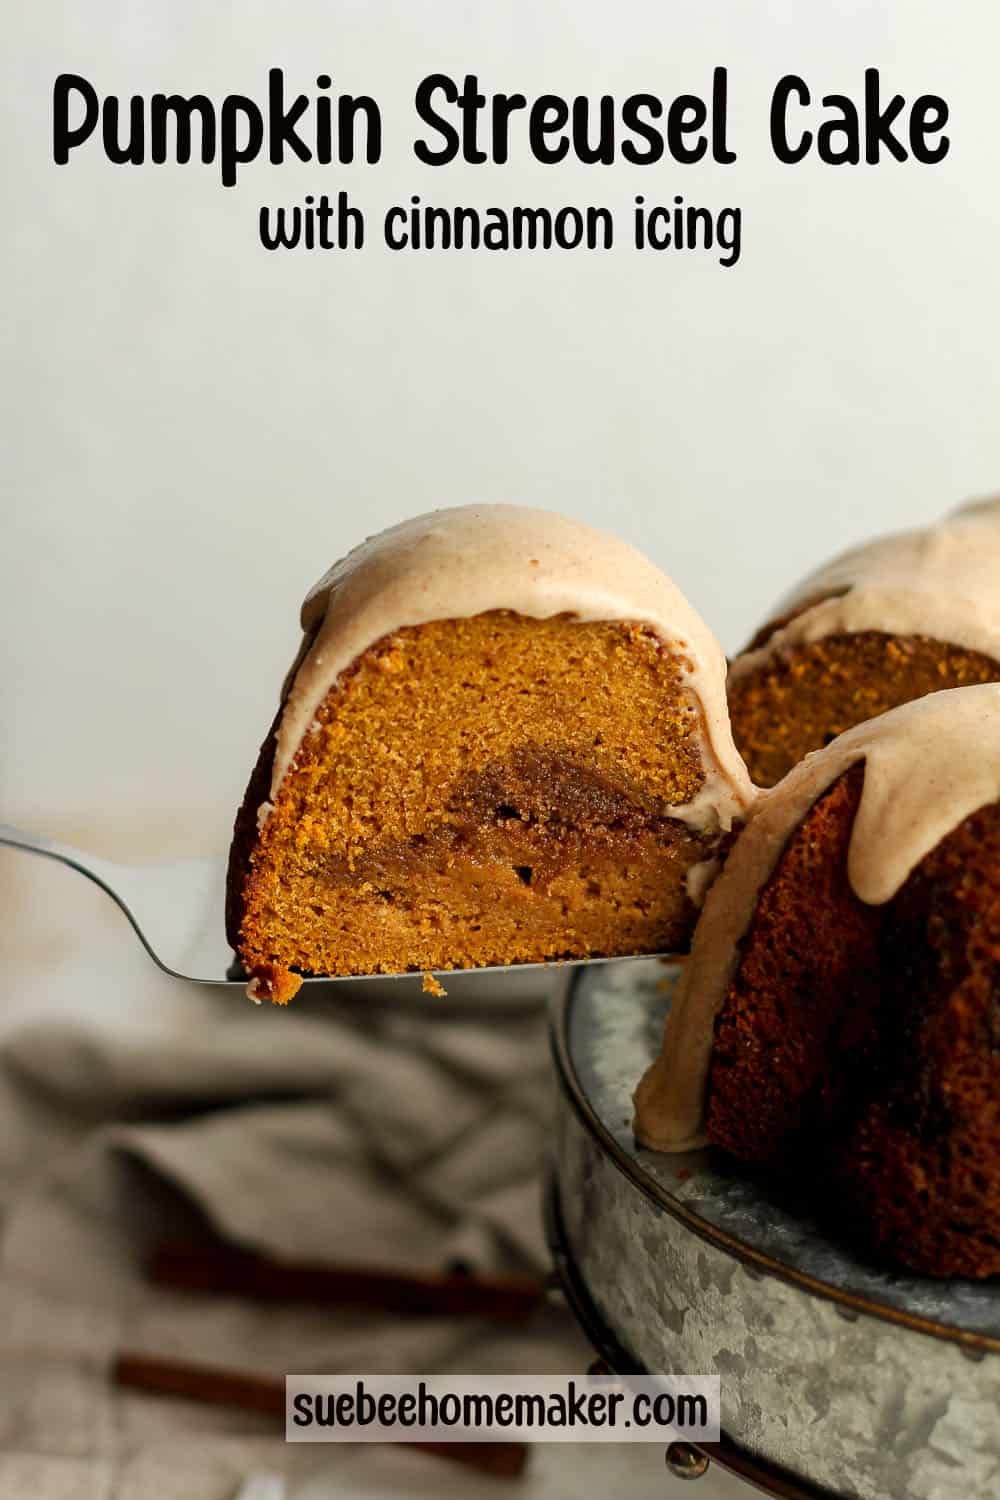 A slice of pumpkin cake being lifted from a whole bundt cake.